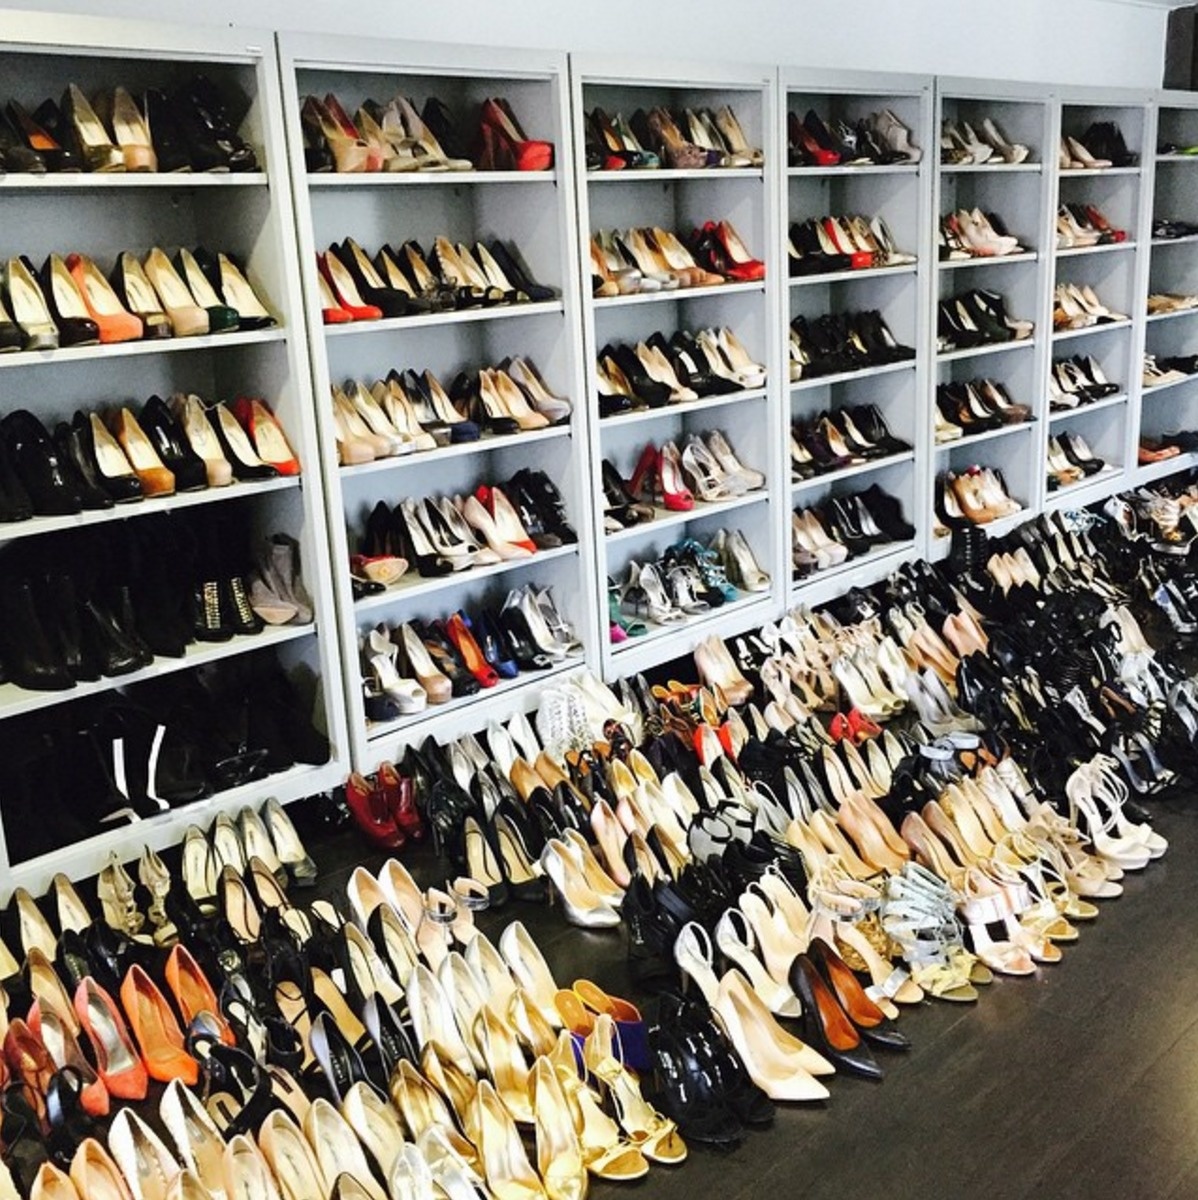 Rachel Zoe loves her shoes, and her closet is a shoe-lover's ultimate fantasy.